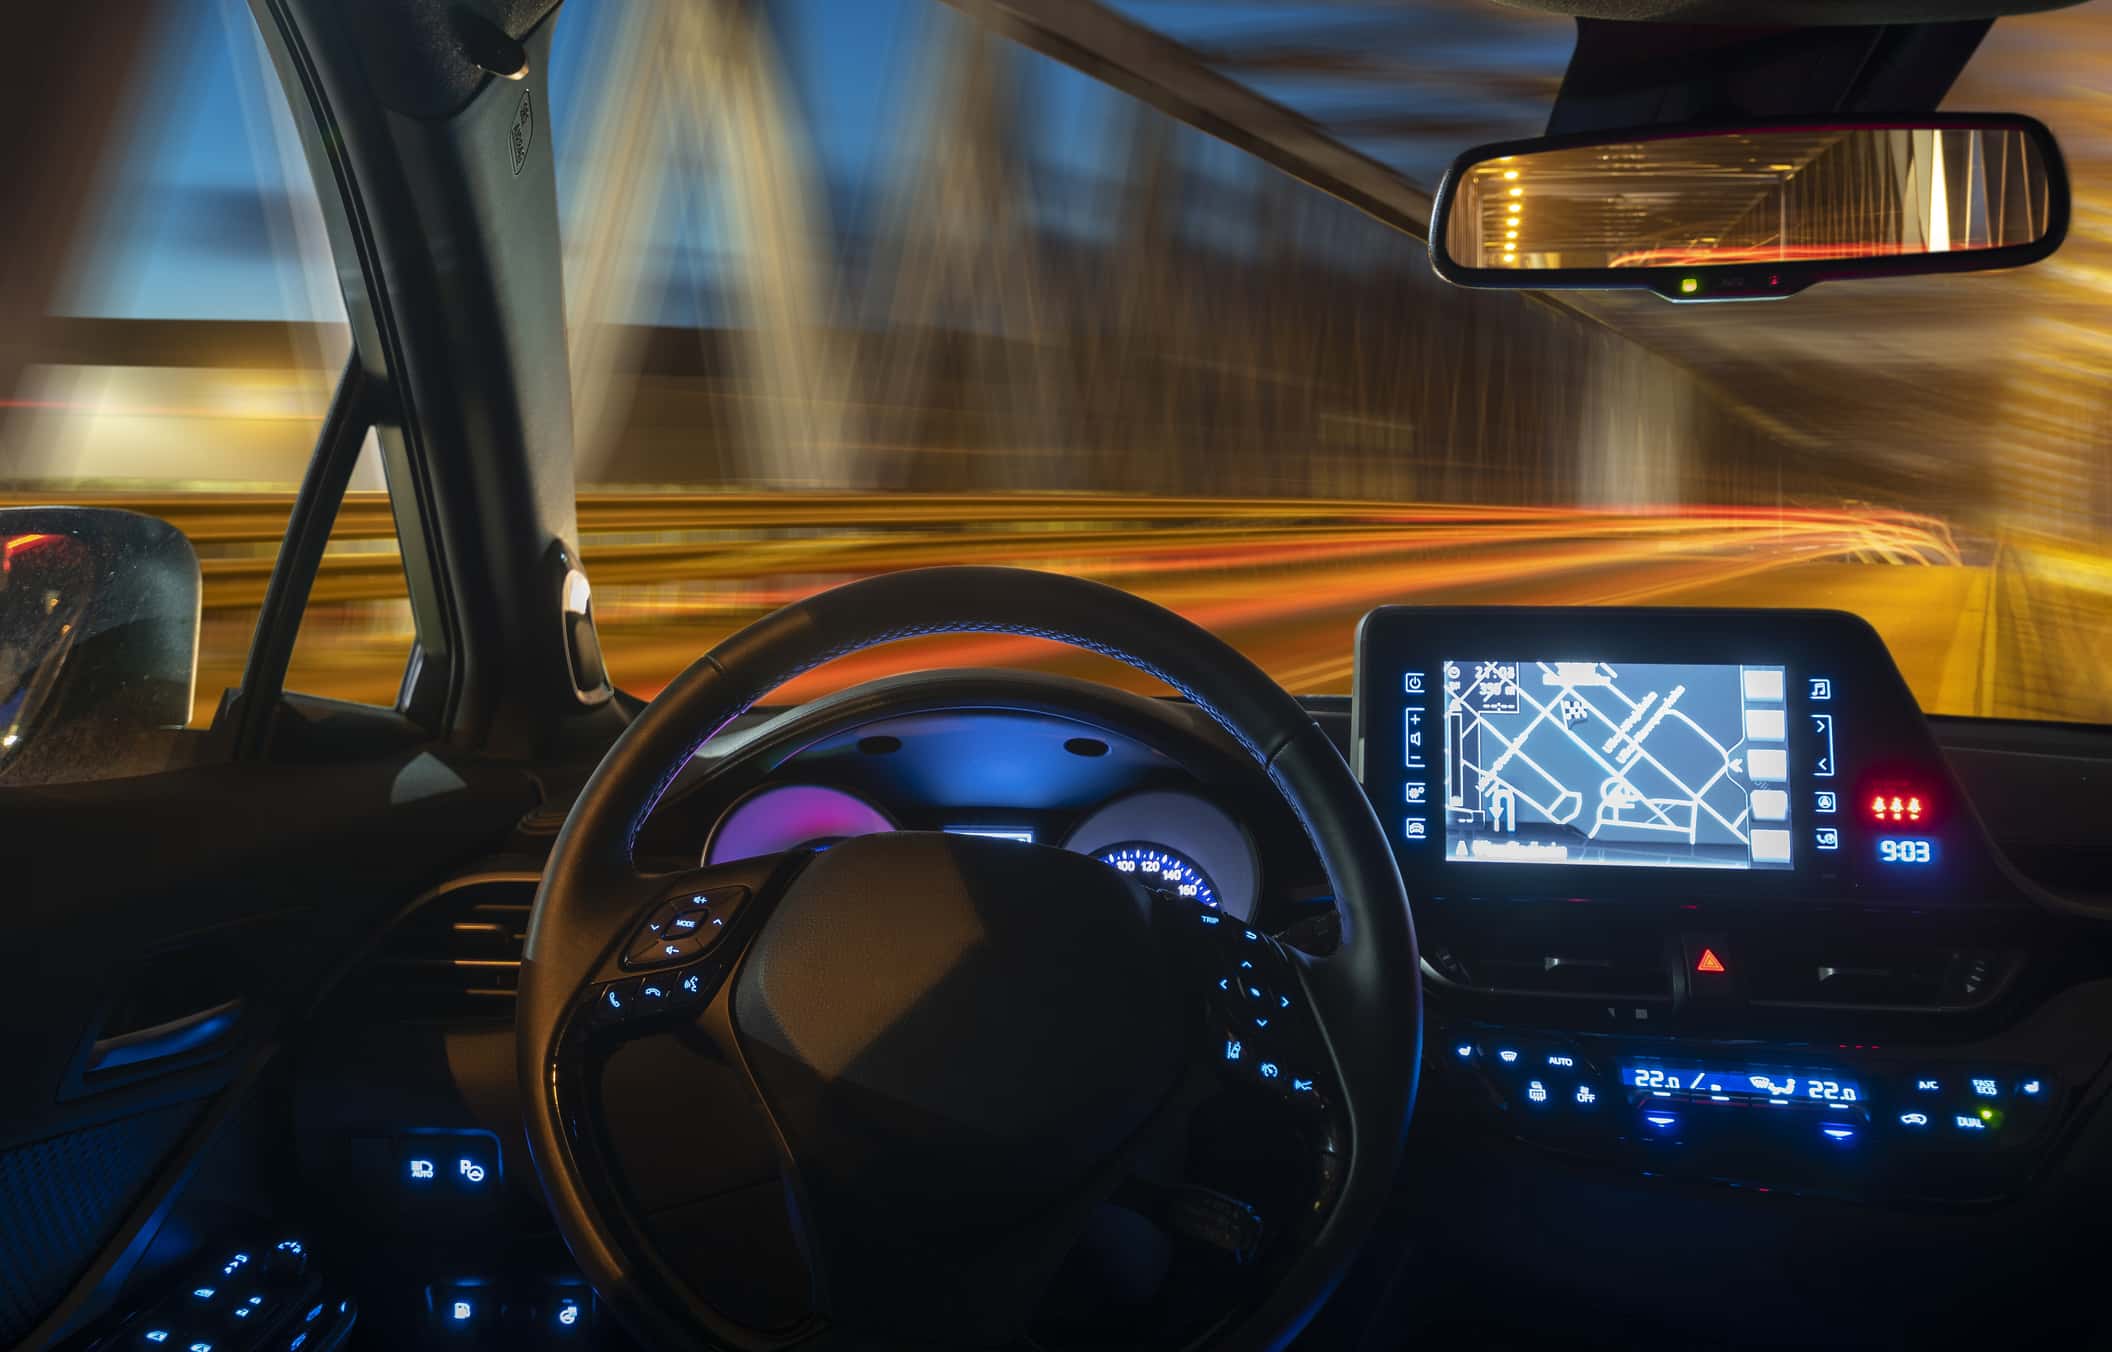 concept-of-the-cockpit-of-an-autonomous-car-driving-at-night-ill